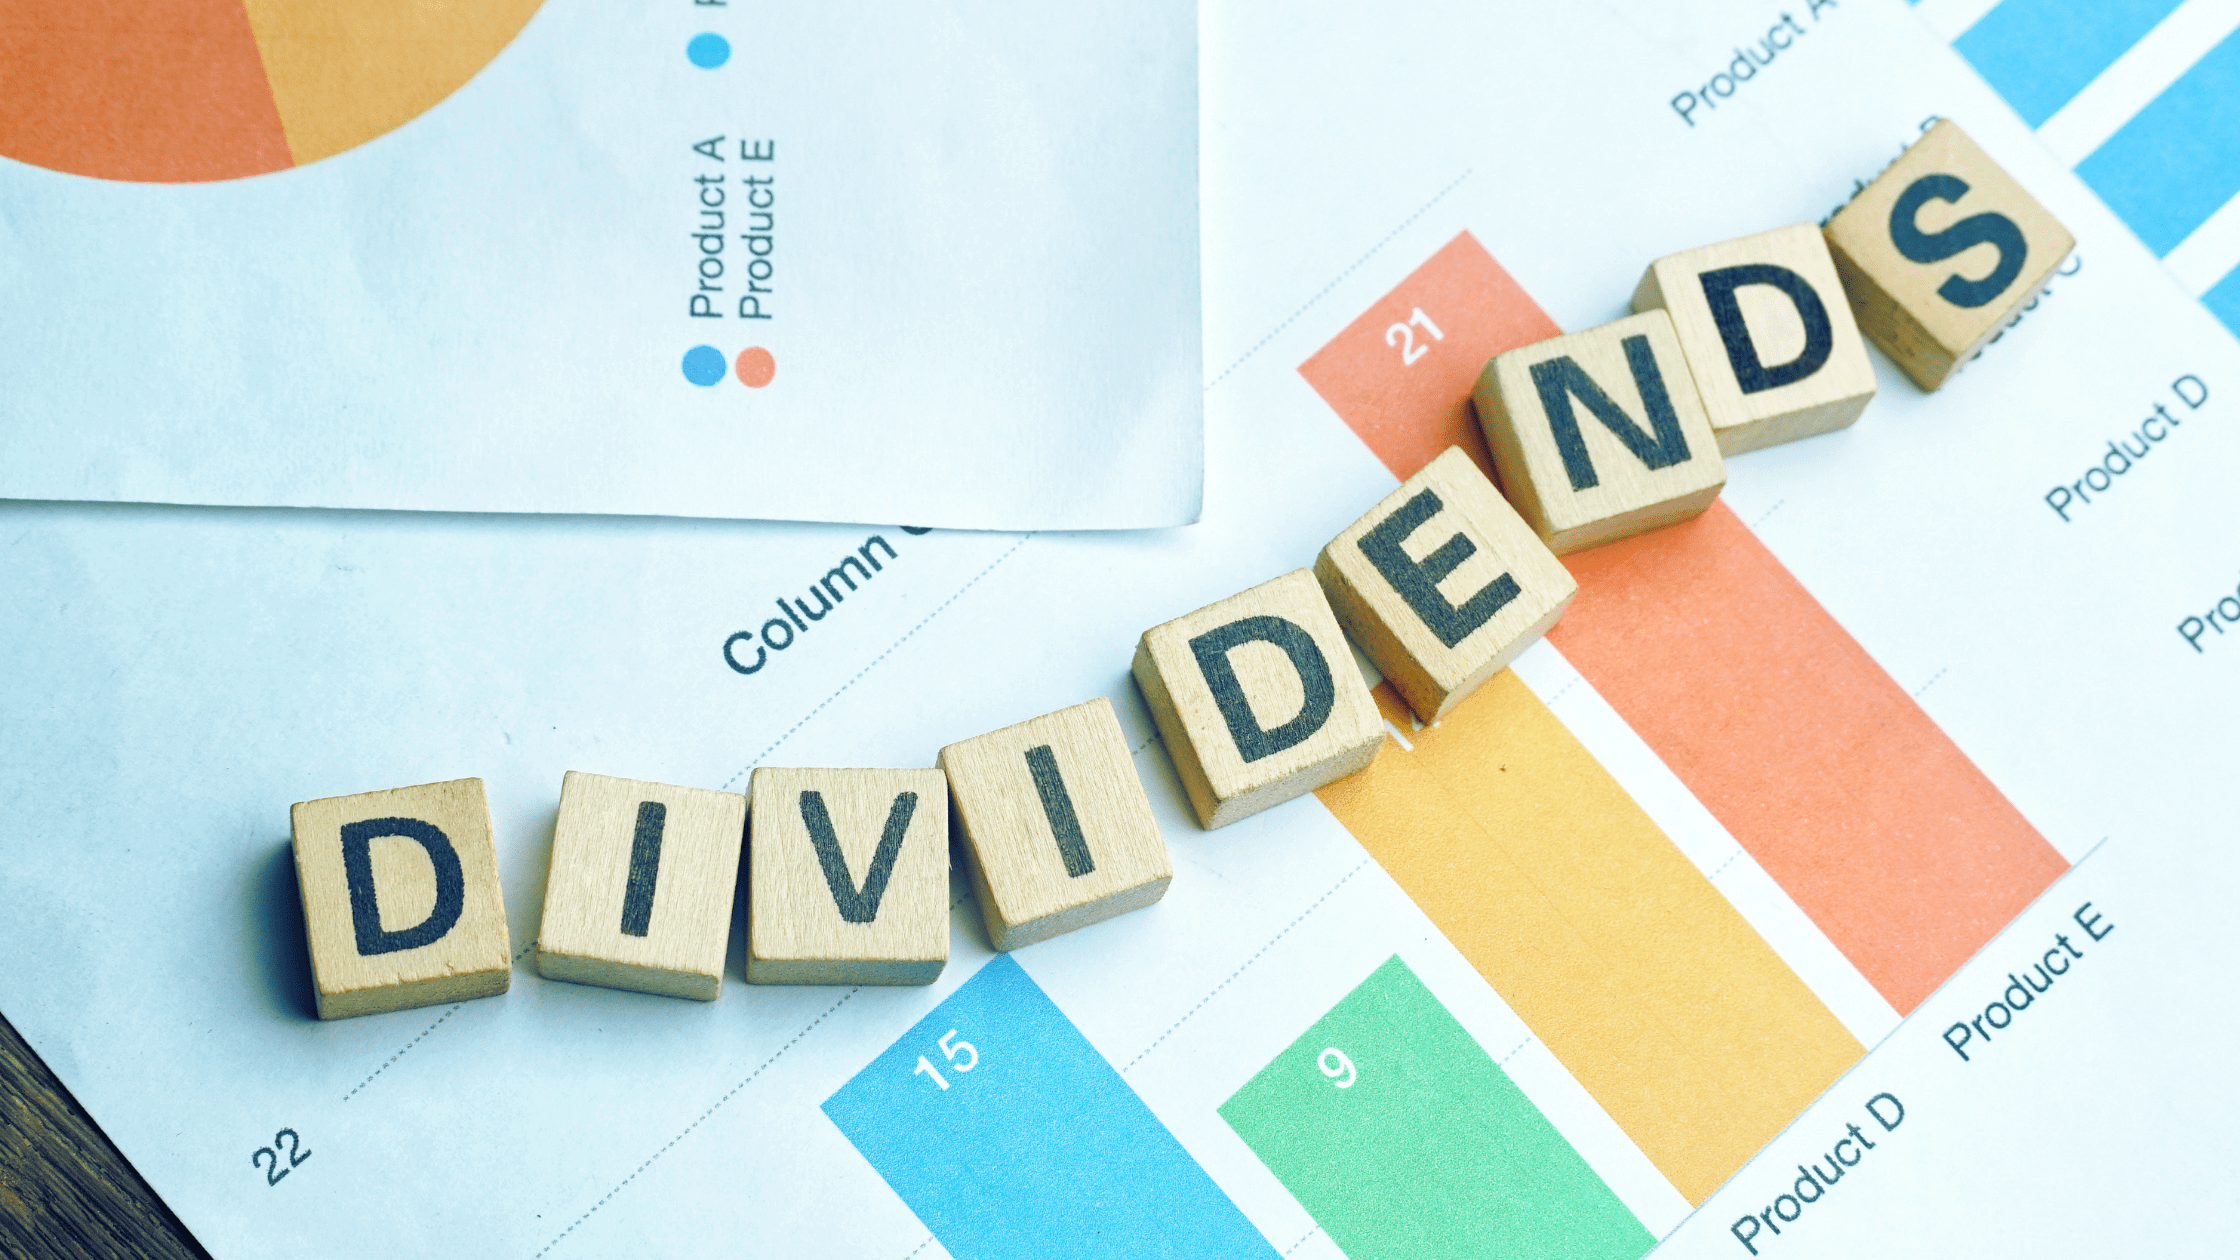 What is Dividend?